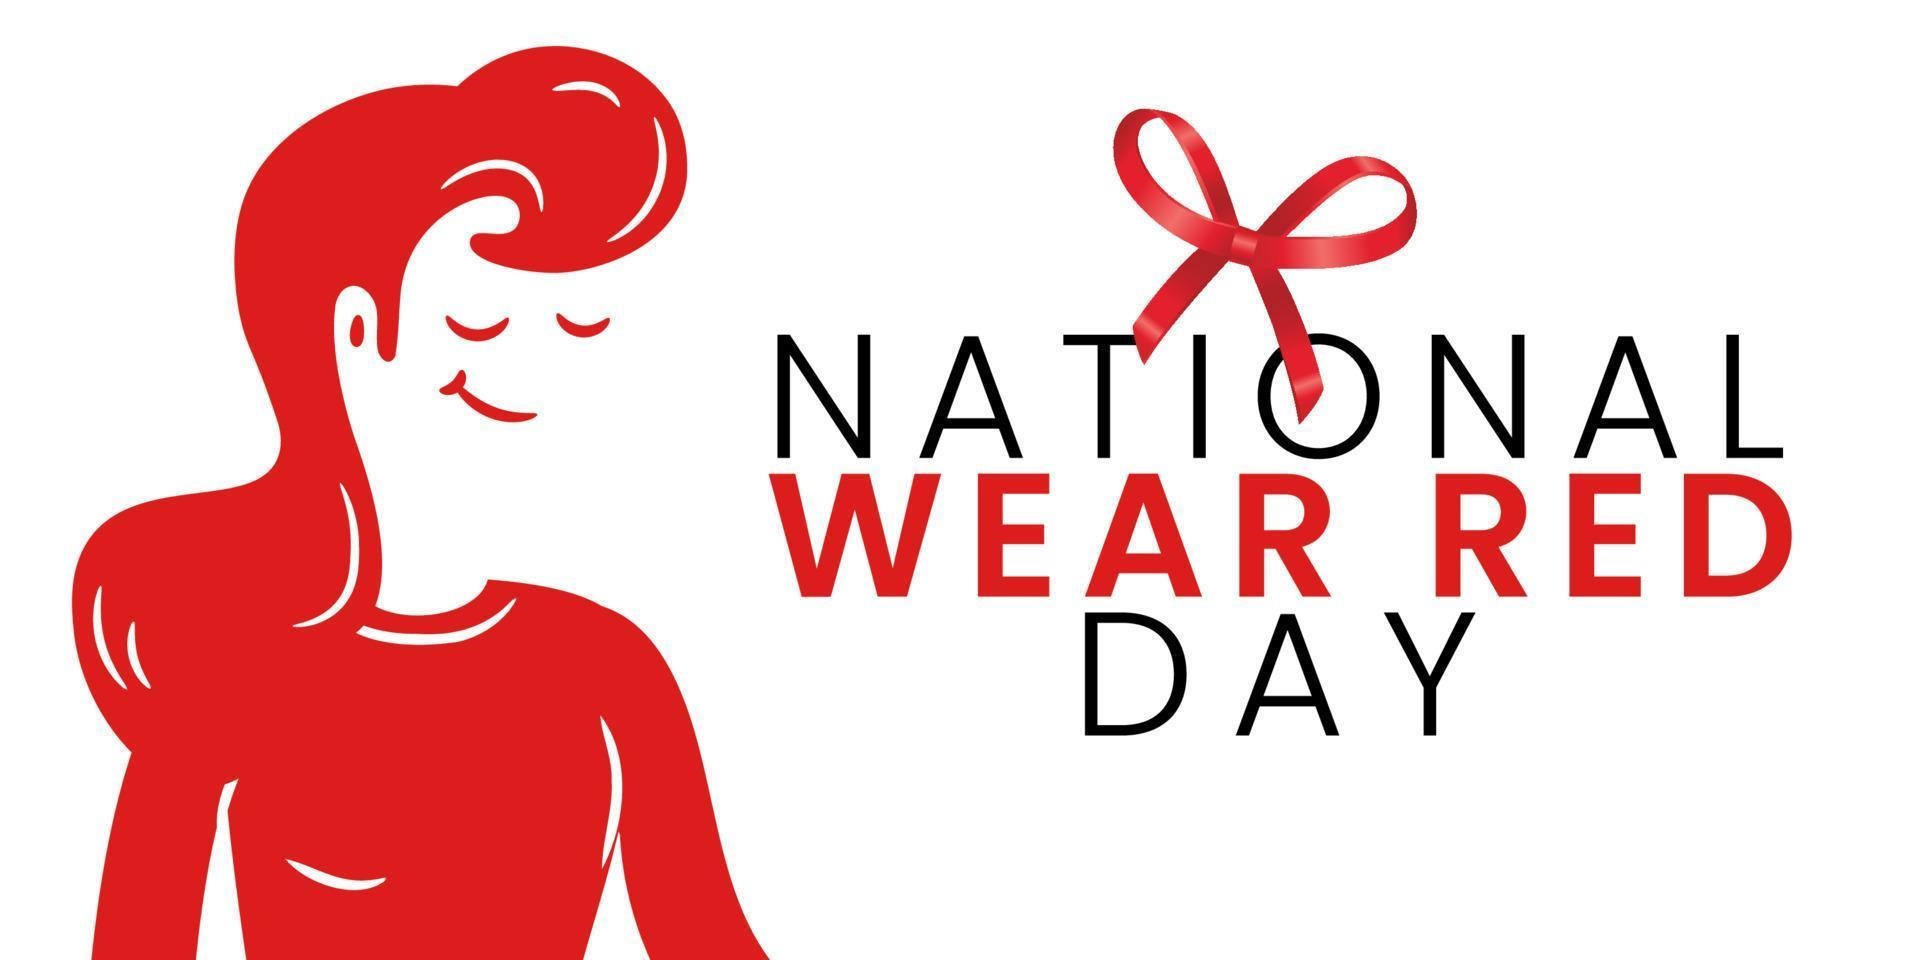 10 Reasons to Wear Red for National Wear Red Day